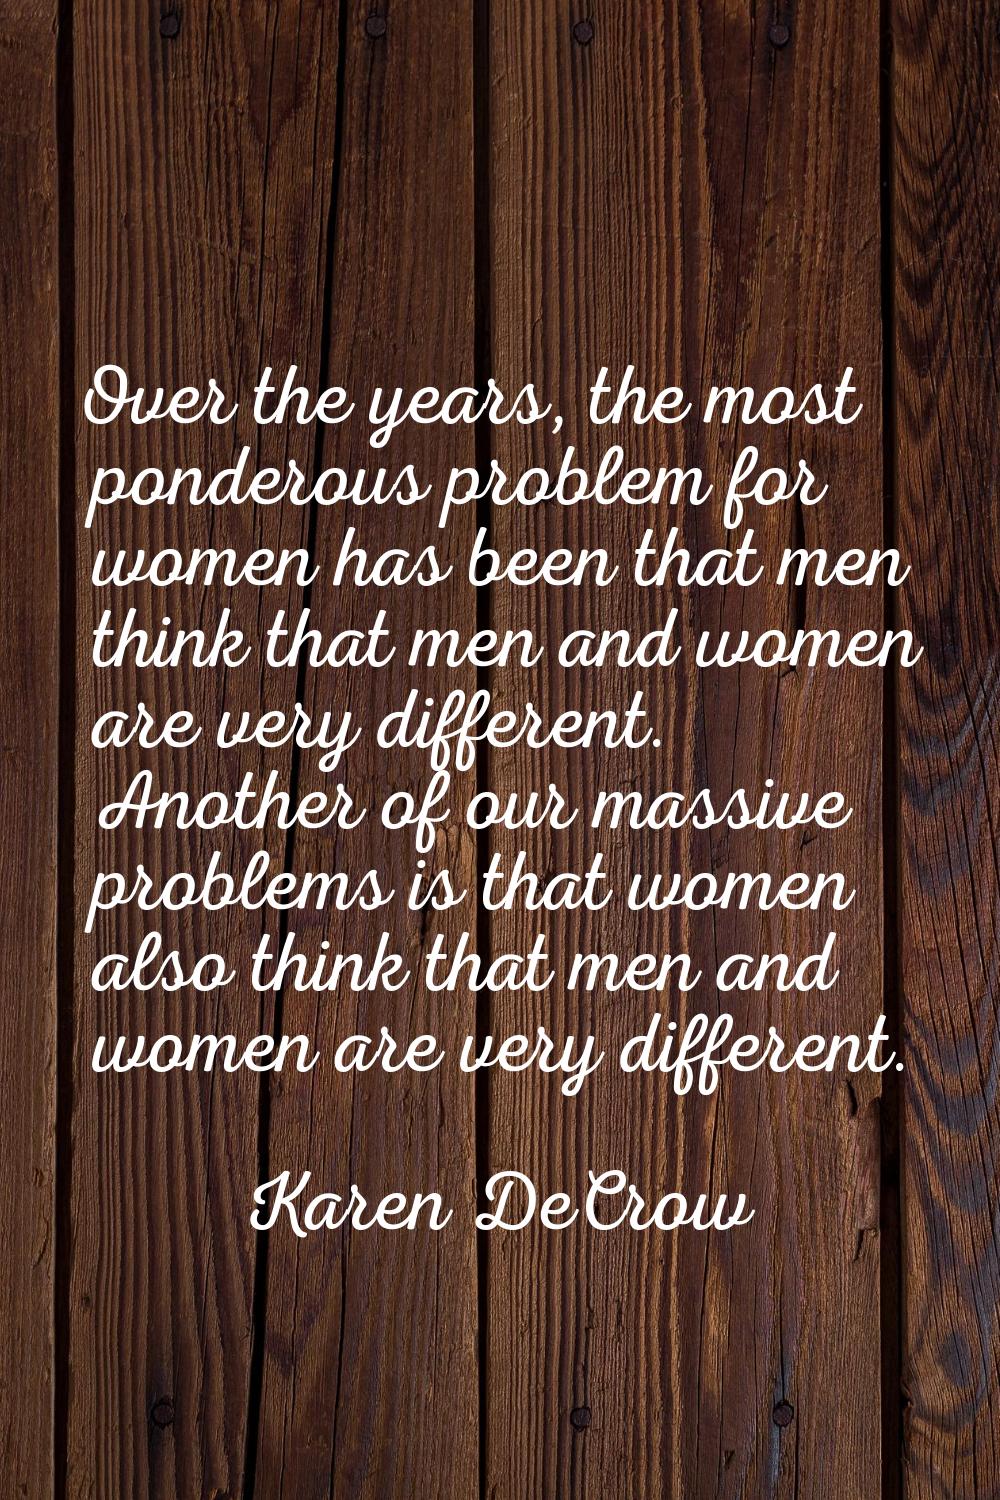 Over the years, the most ponderous problem for women has been that men think that men and women are